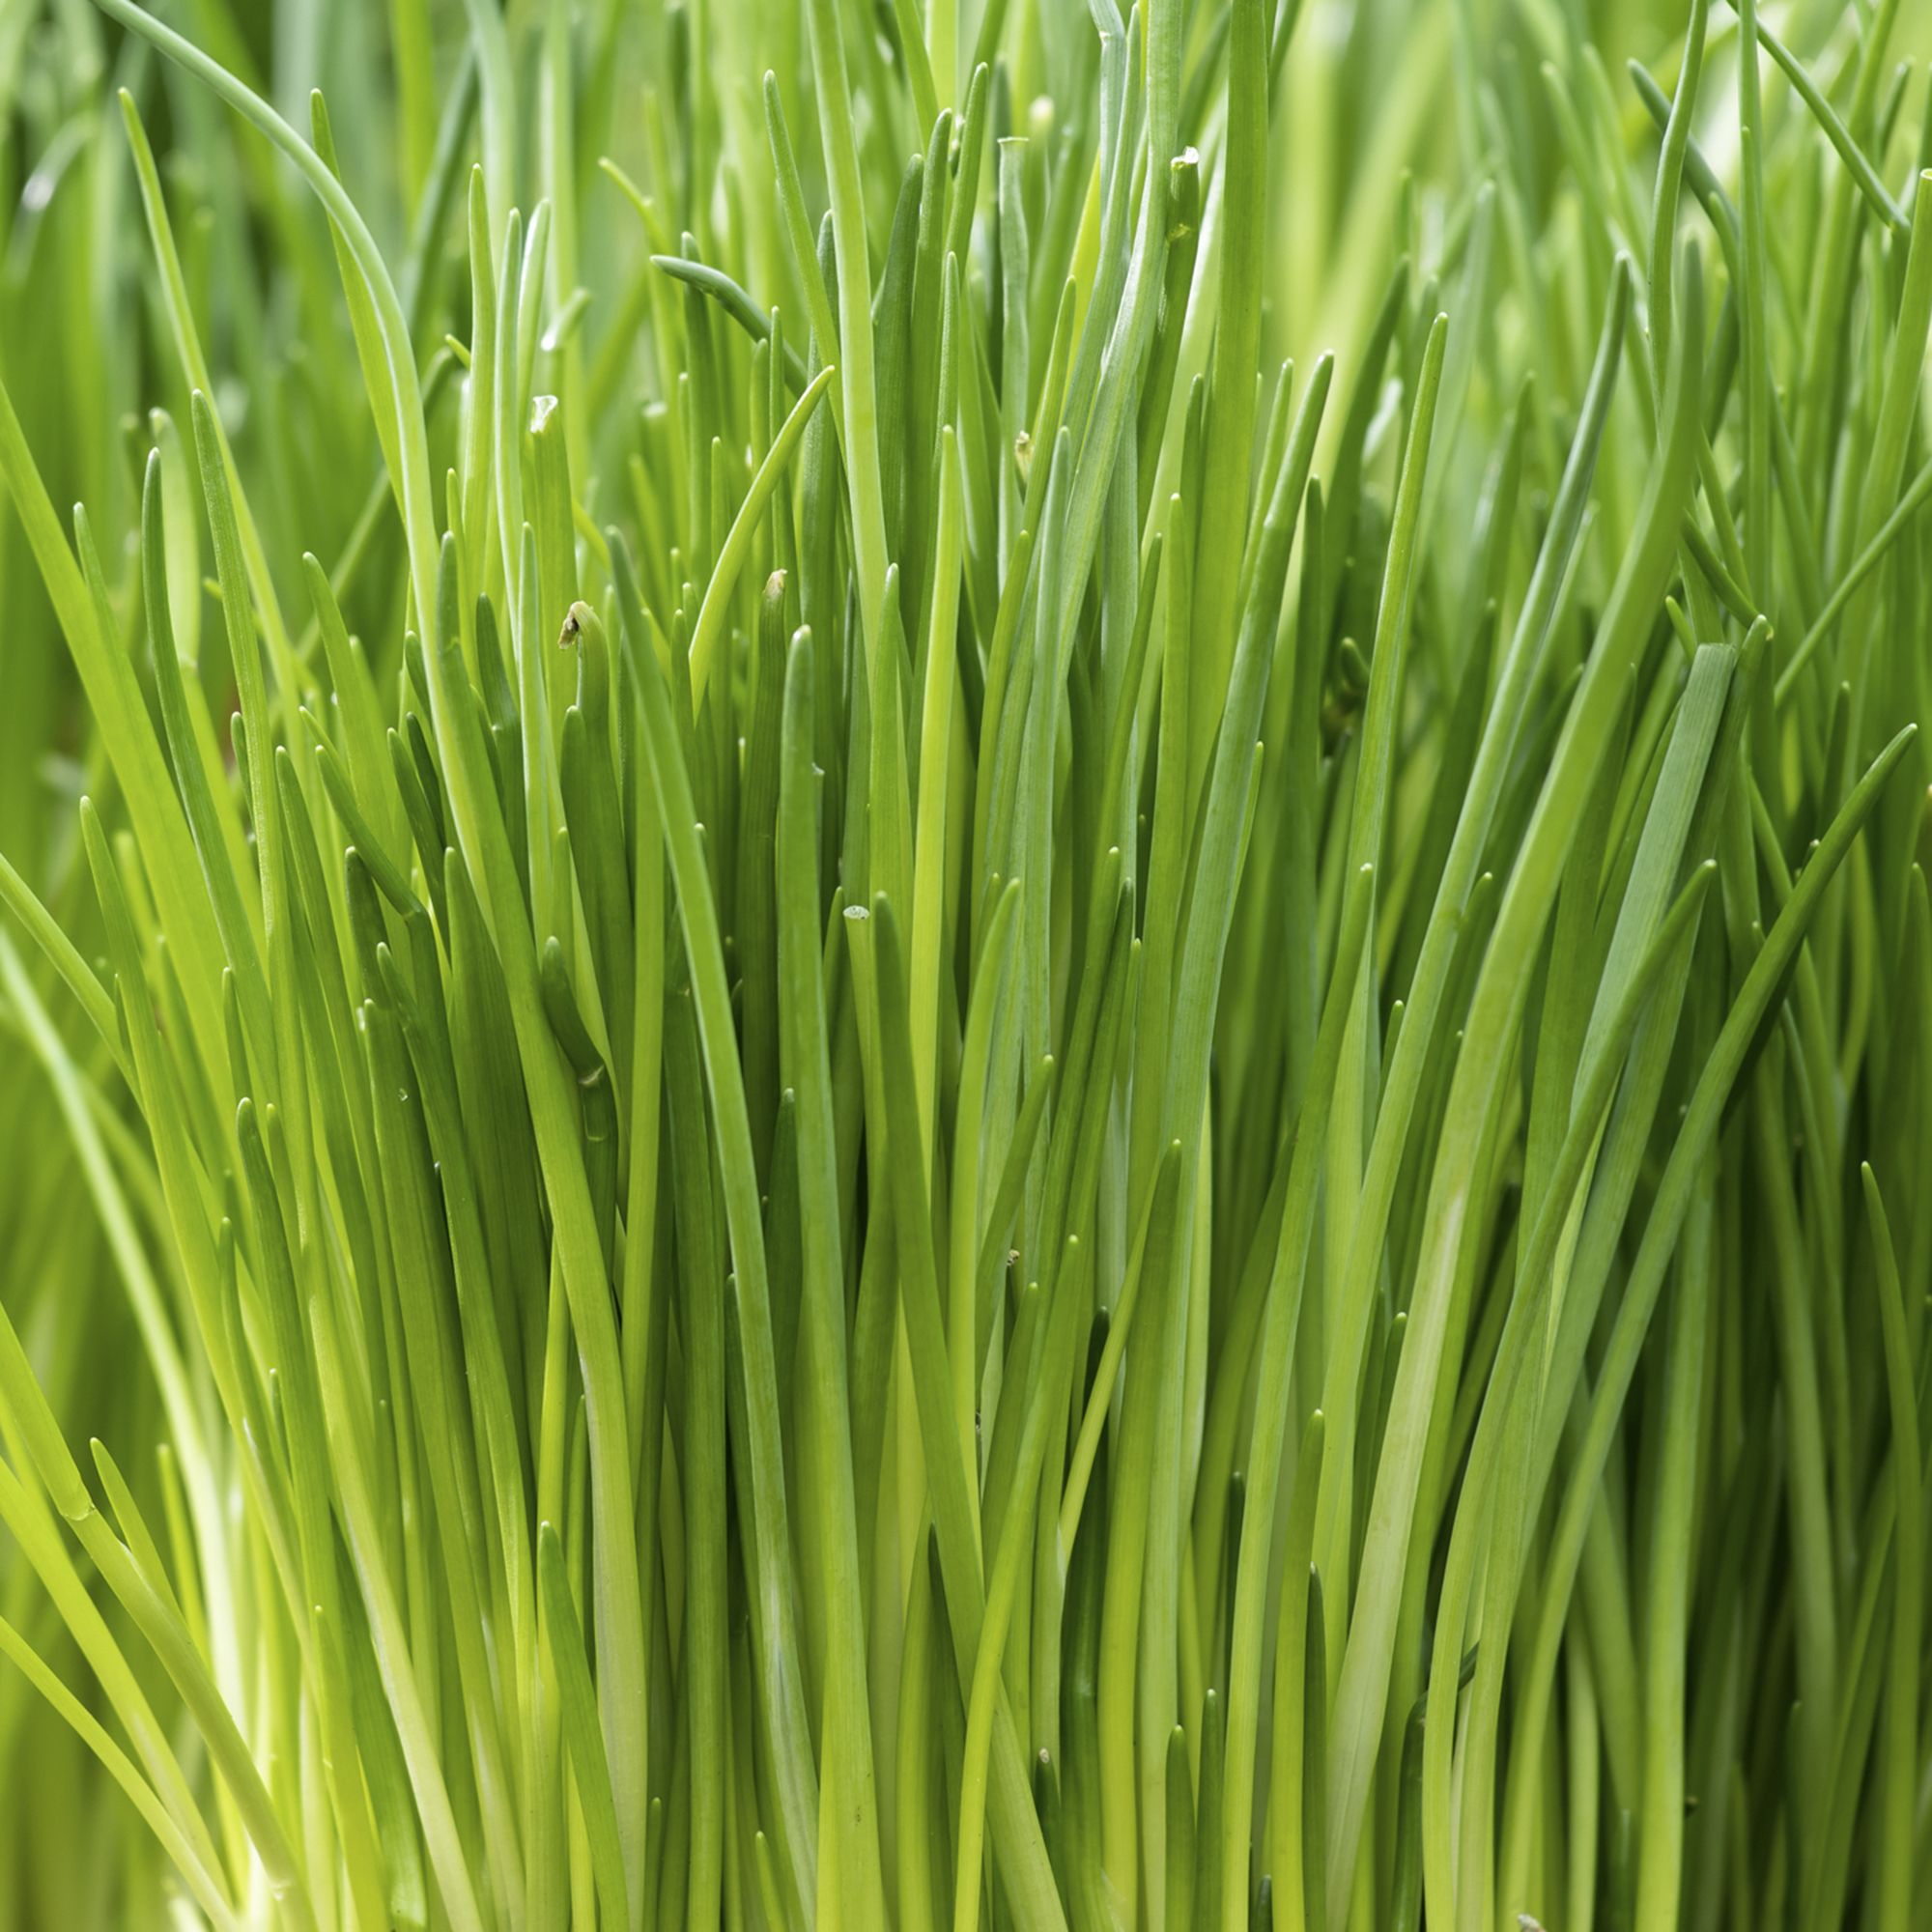 Verve Chive Seed